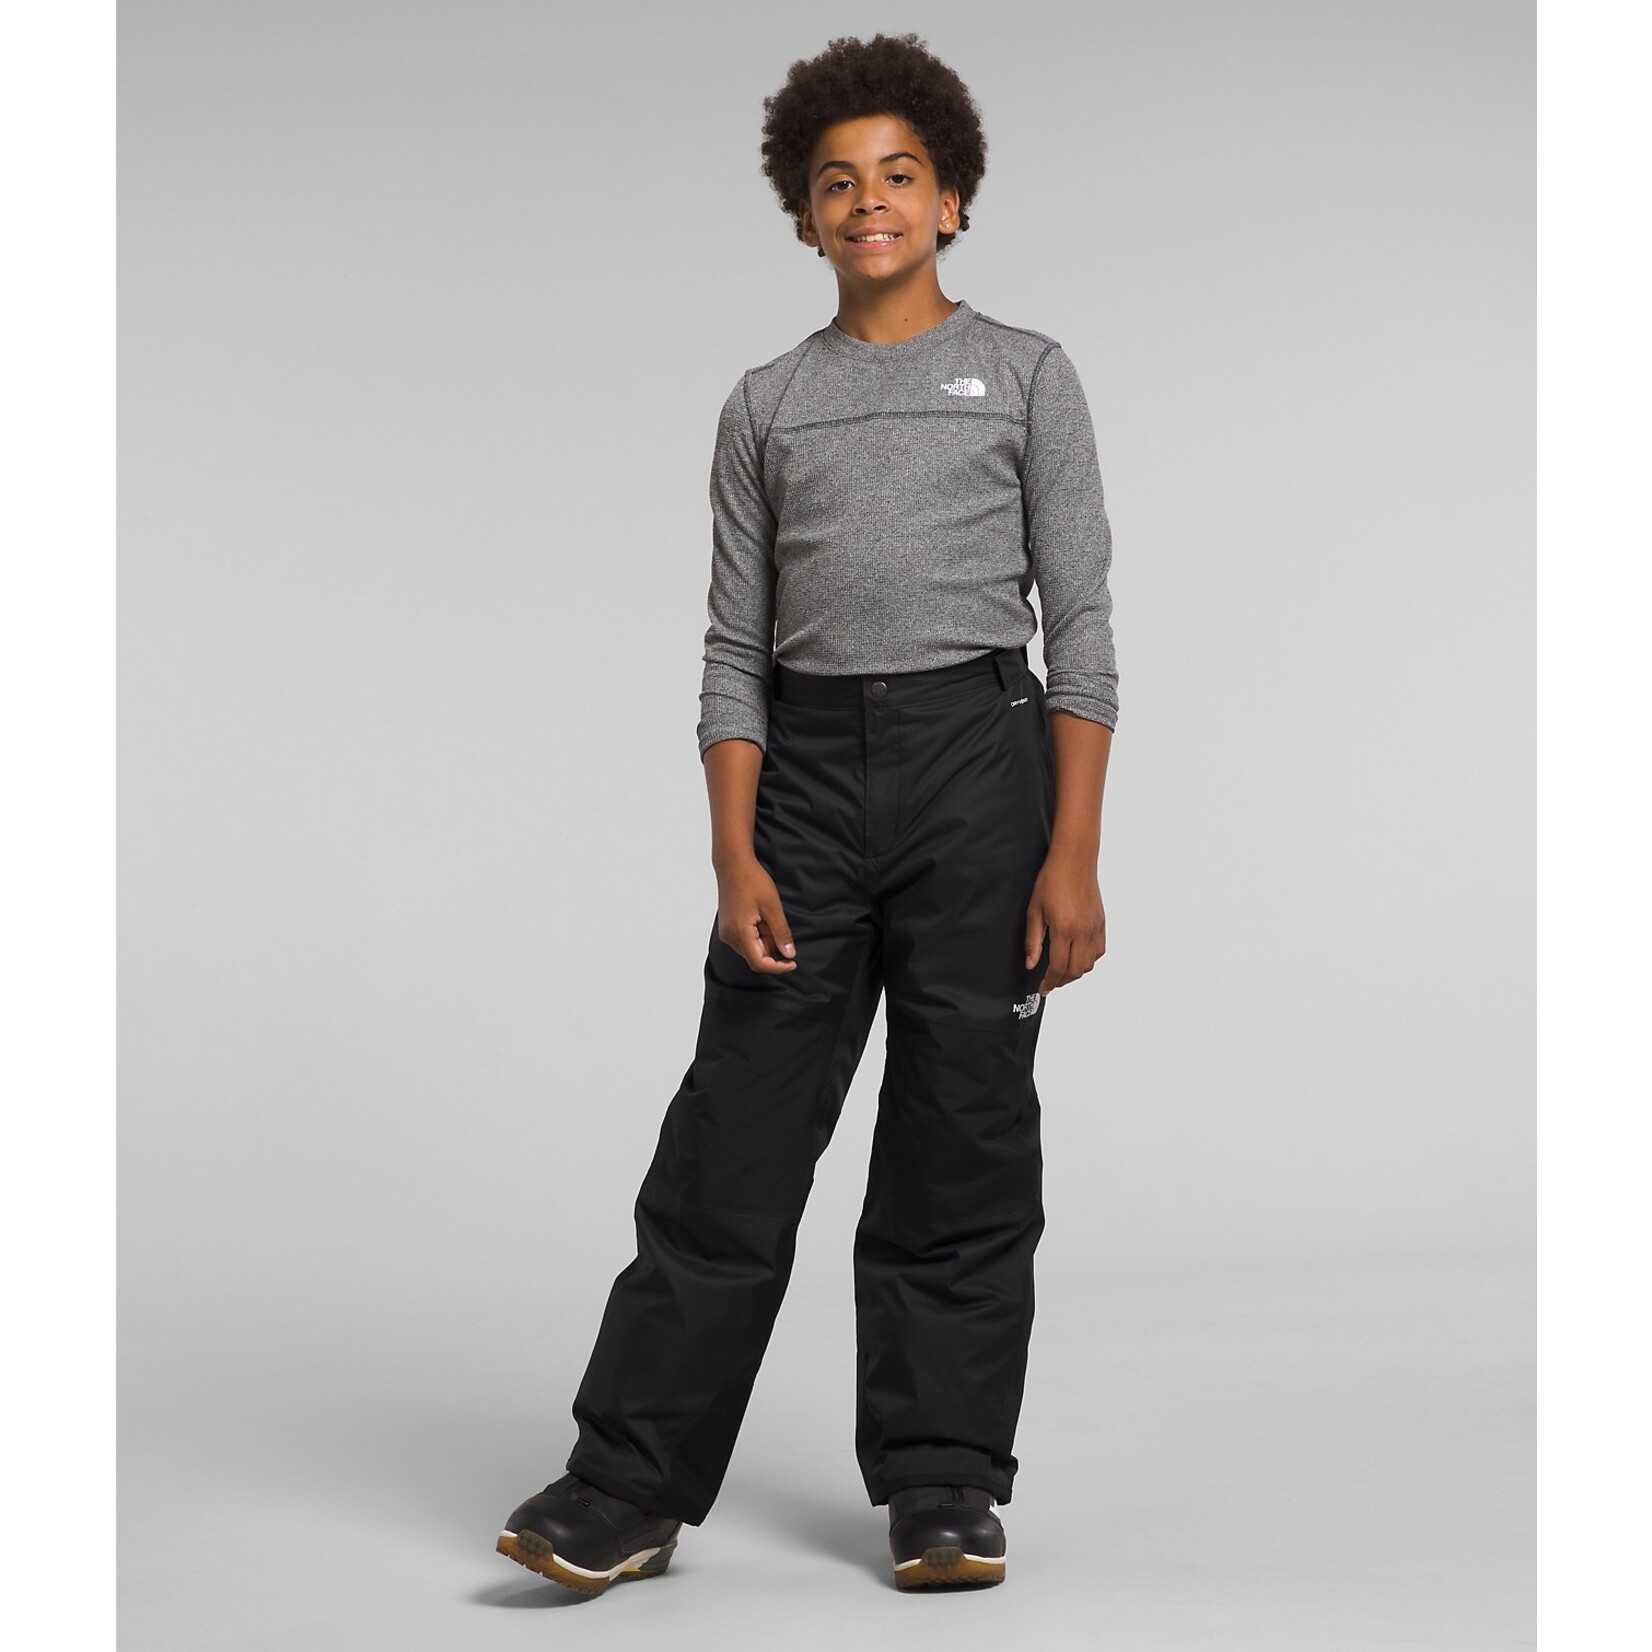 THE NORTH FACE Boys Freedom Insulated  Pant